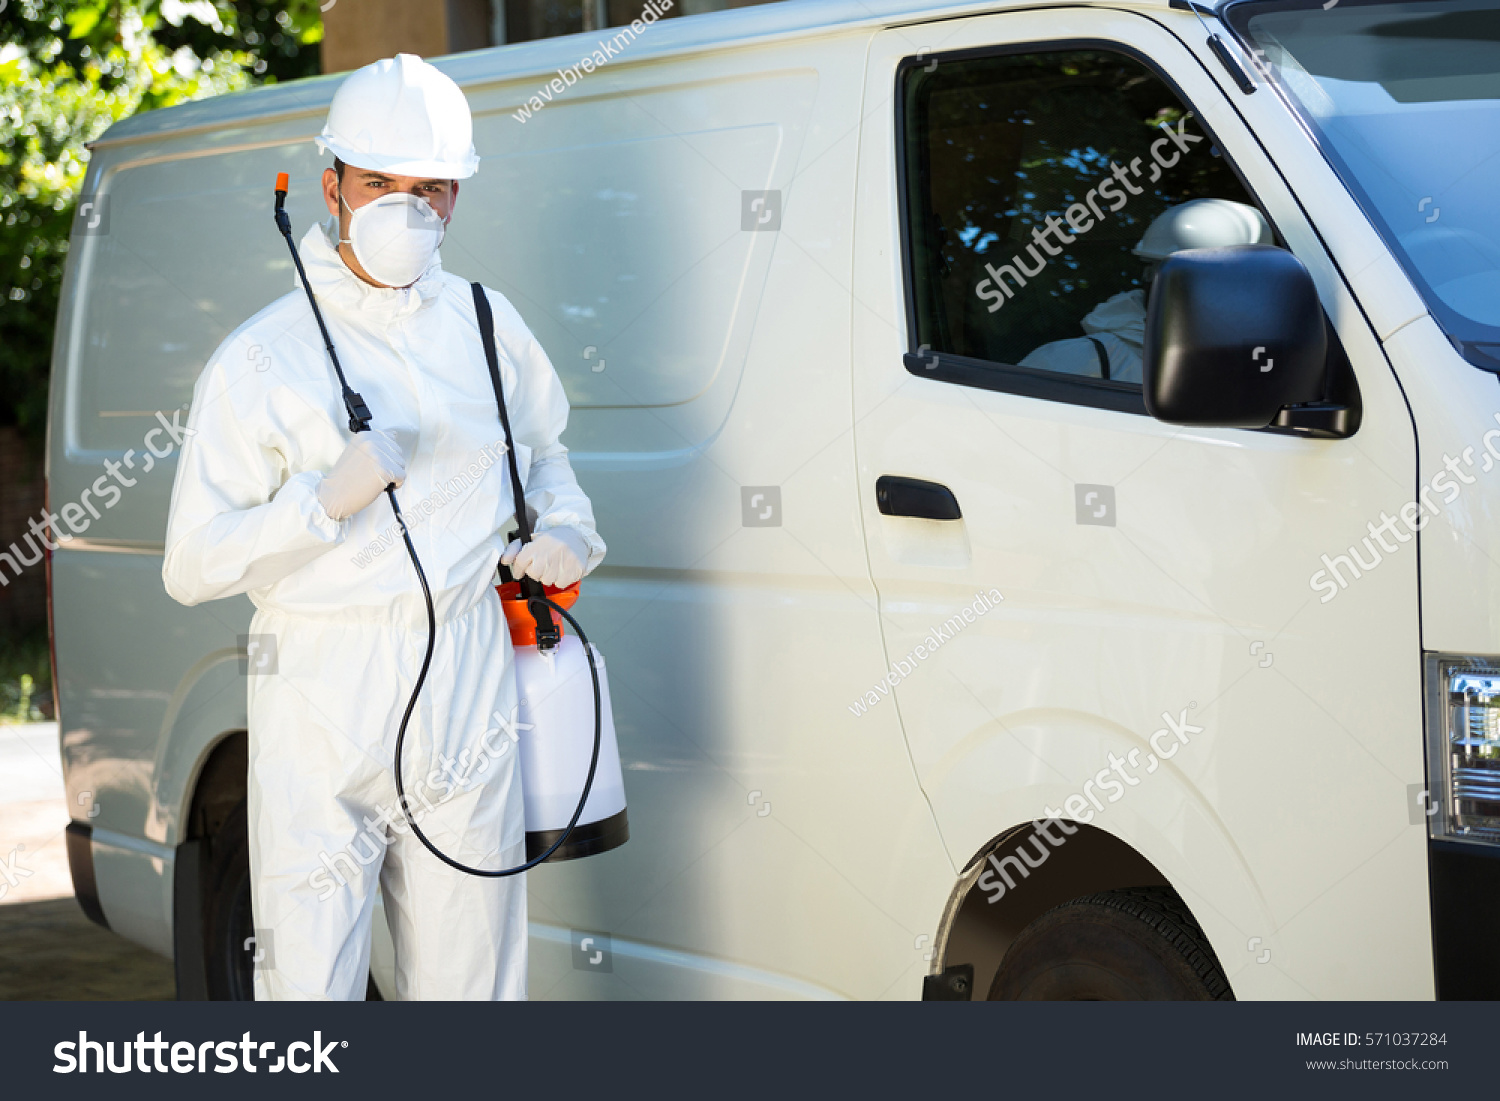 Portrait of pest control man standing next to a van on a street #571037284